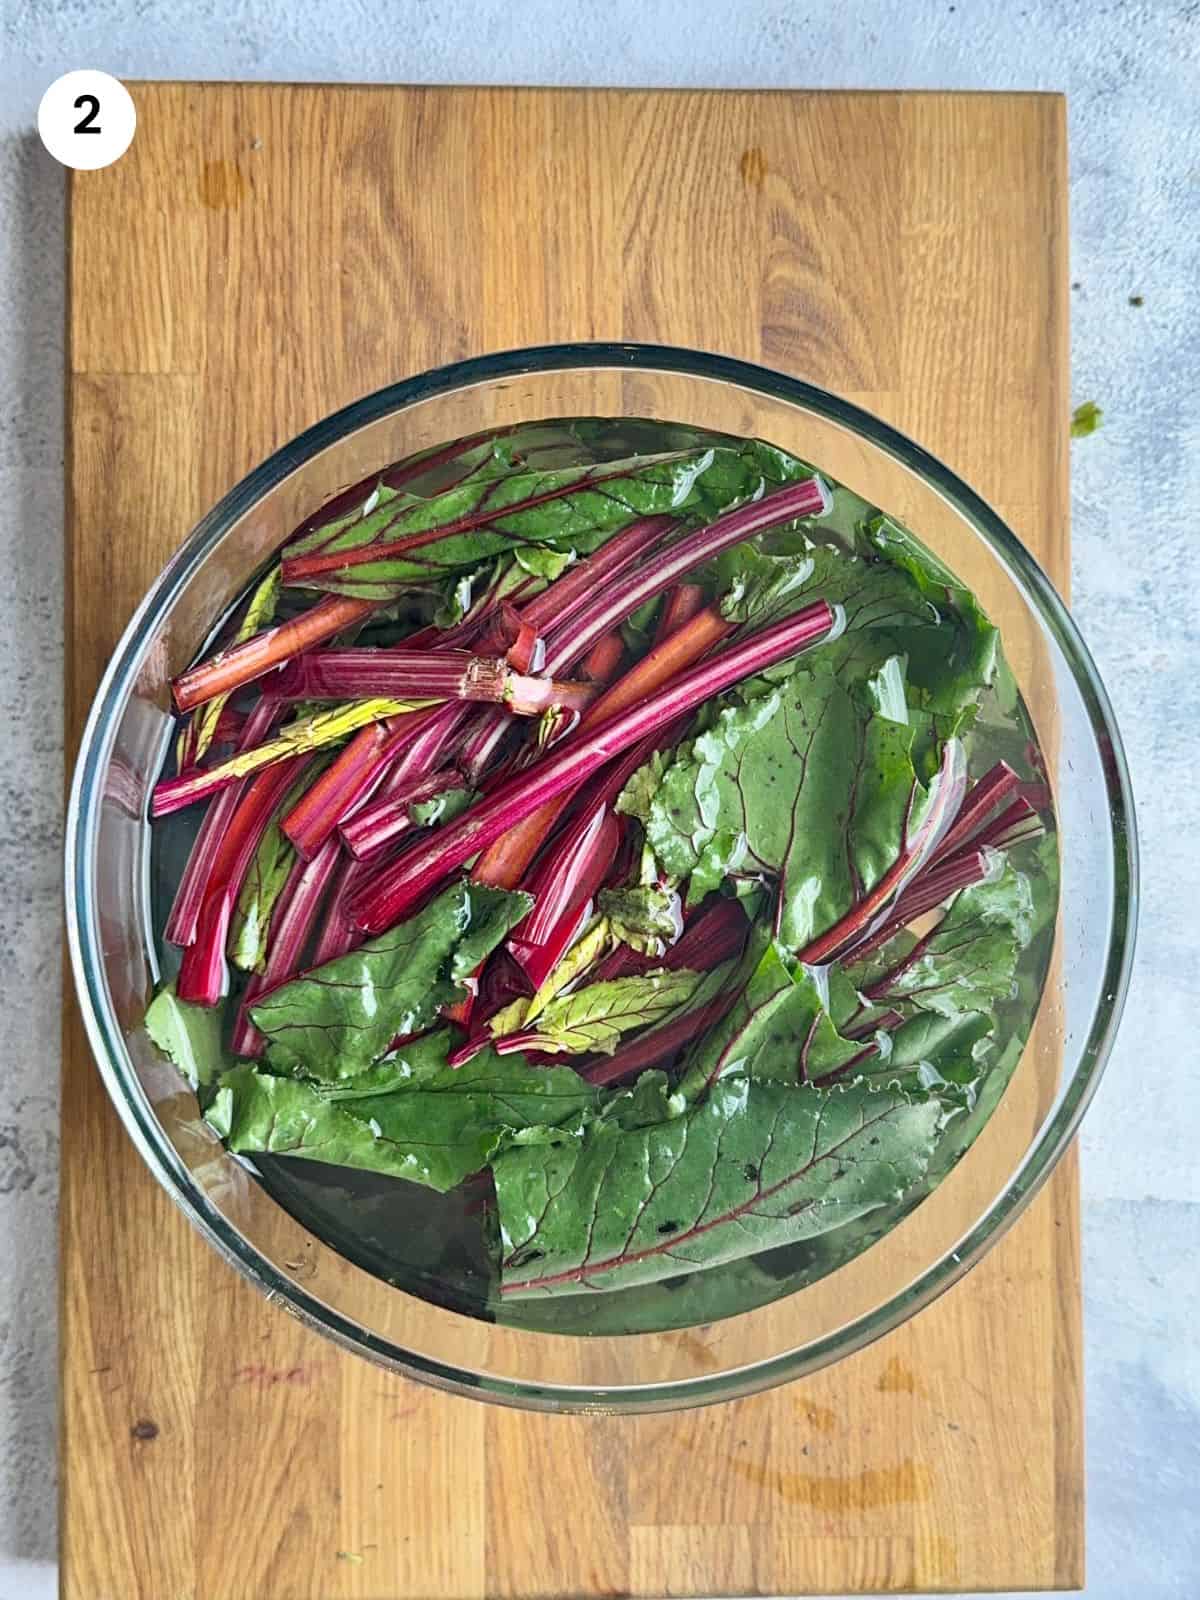 Beet leaves in a big bowl filled with water.